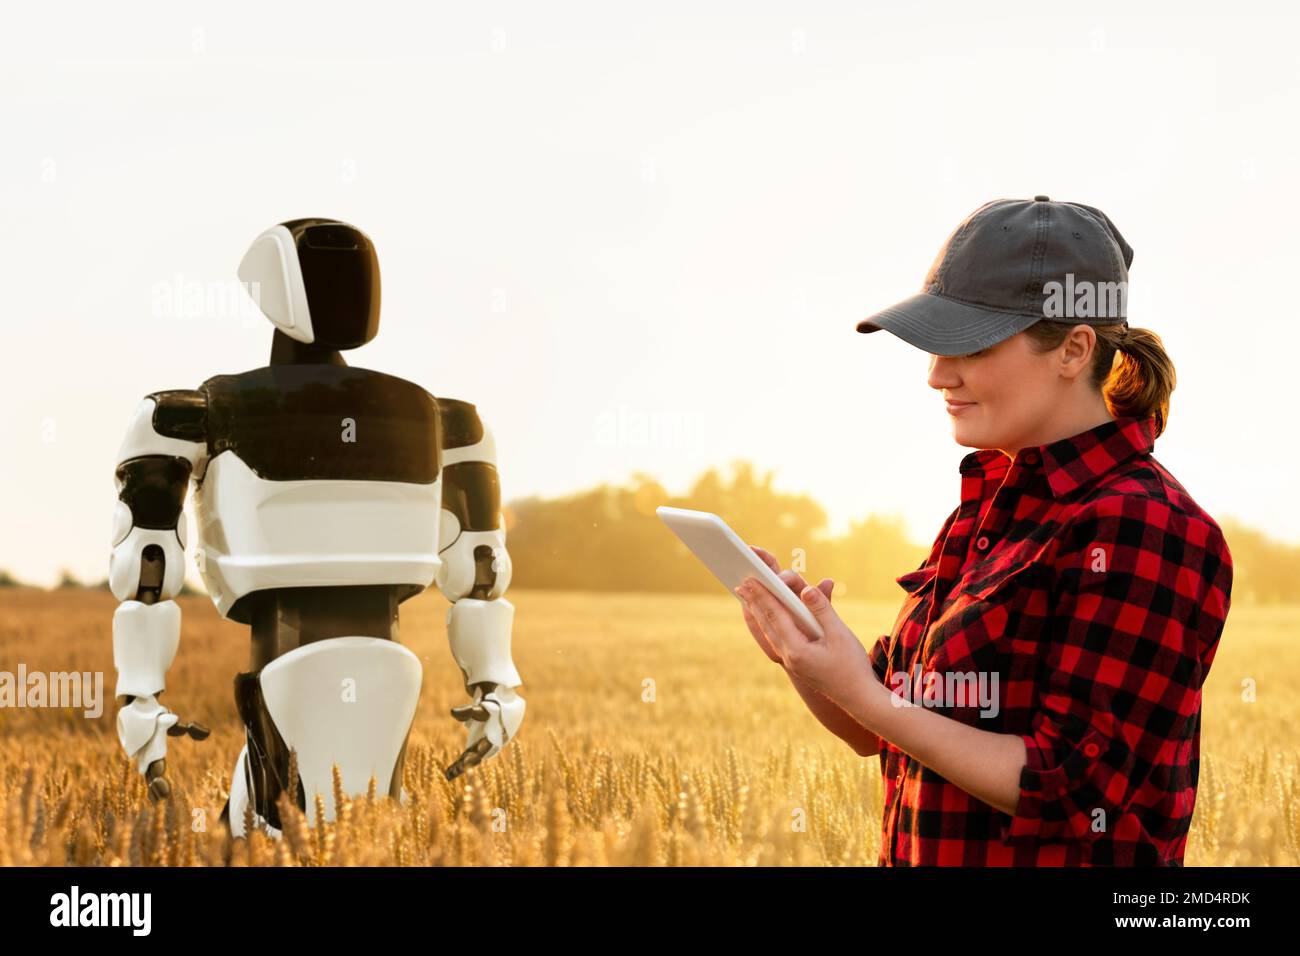 Woman farmer controls robot on an agricultural wheat field. Smart farming concept Stock Photo